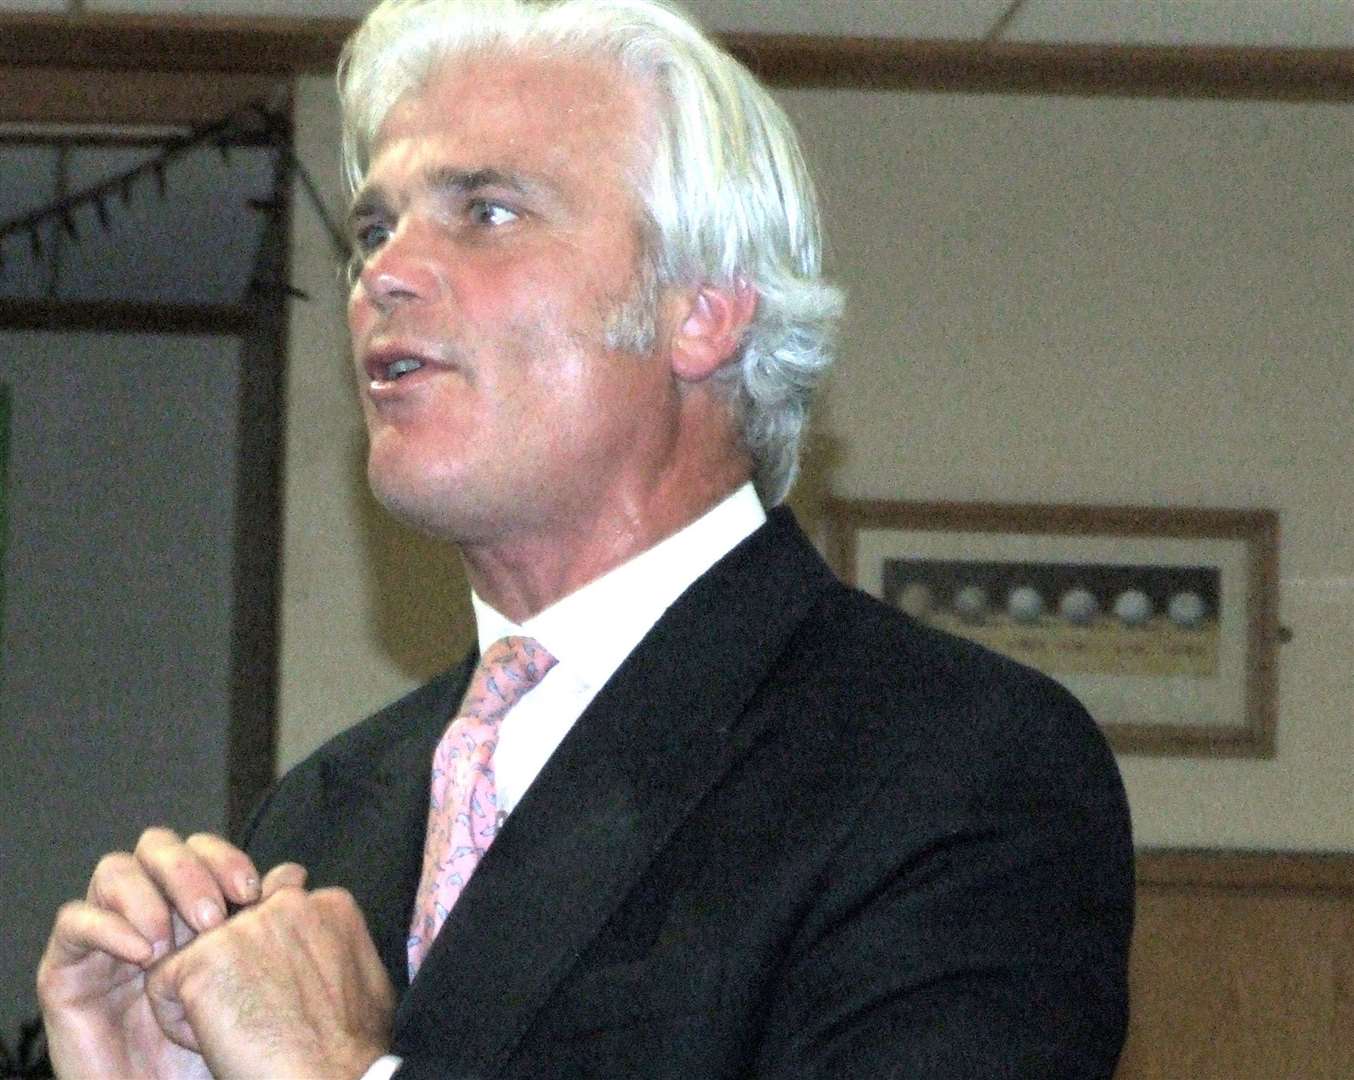 Sir Desmond Swayne told the group to "persist" in their campaign Picture: Alan Watkins